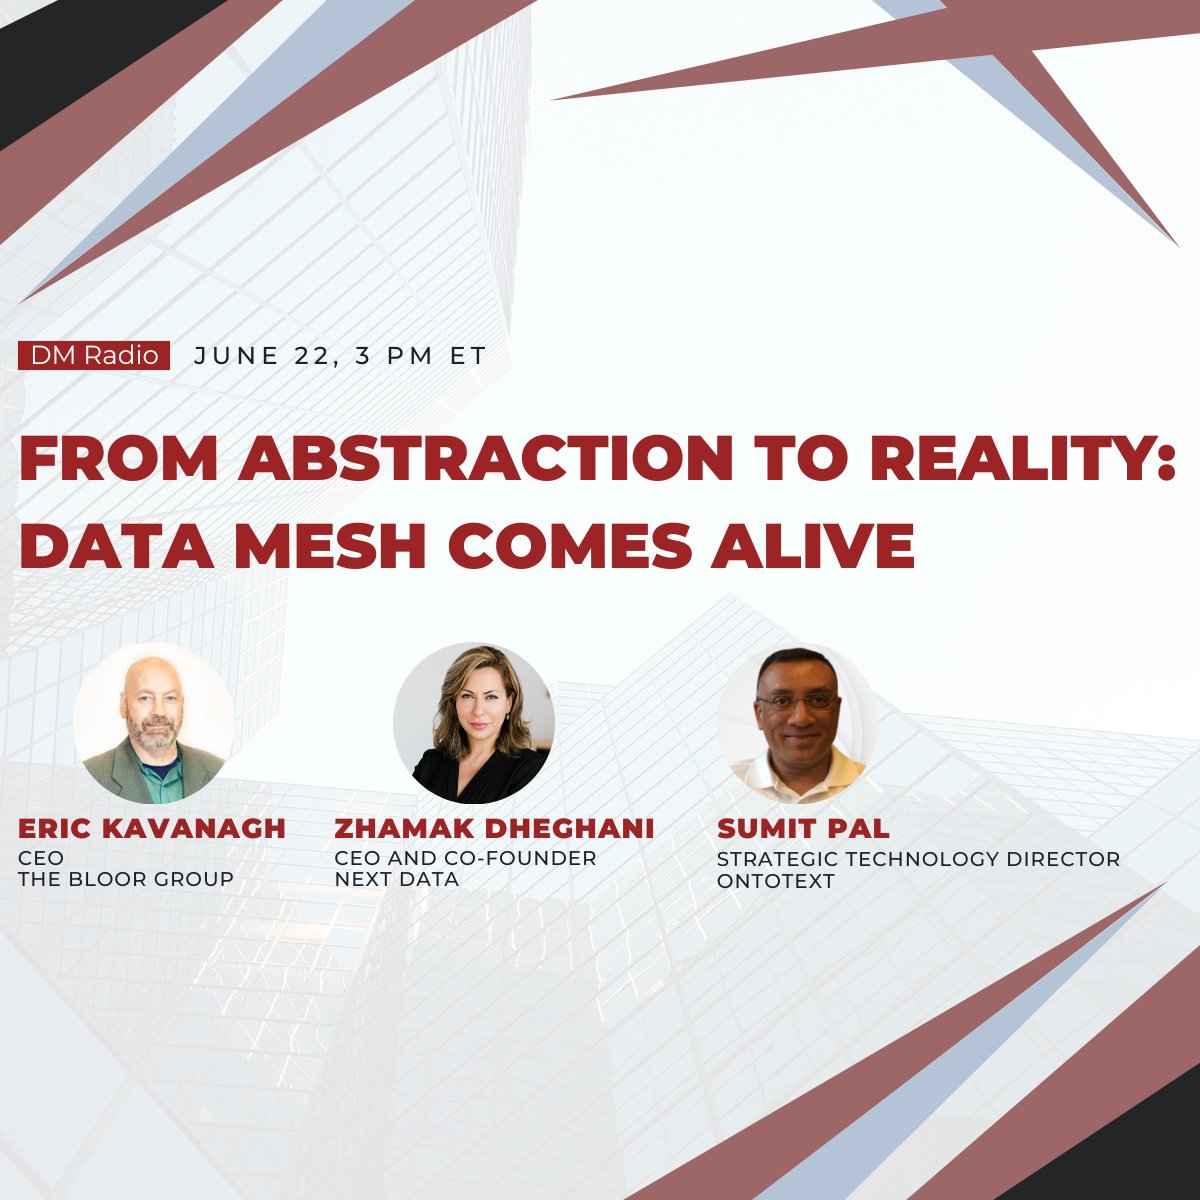 🌐 Discover the world of #DataMesh and its transformative potential! to learn how localized #DataManagement is revolutionizing the #data landscape. Register now! 

insideanalysis.com/yourls/062223dm

@ontotext